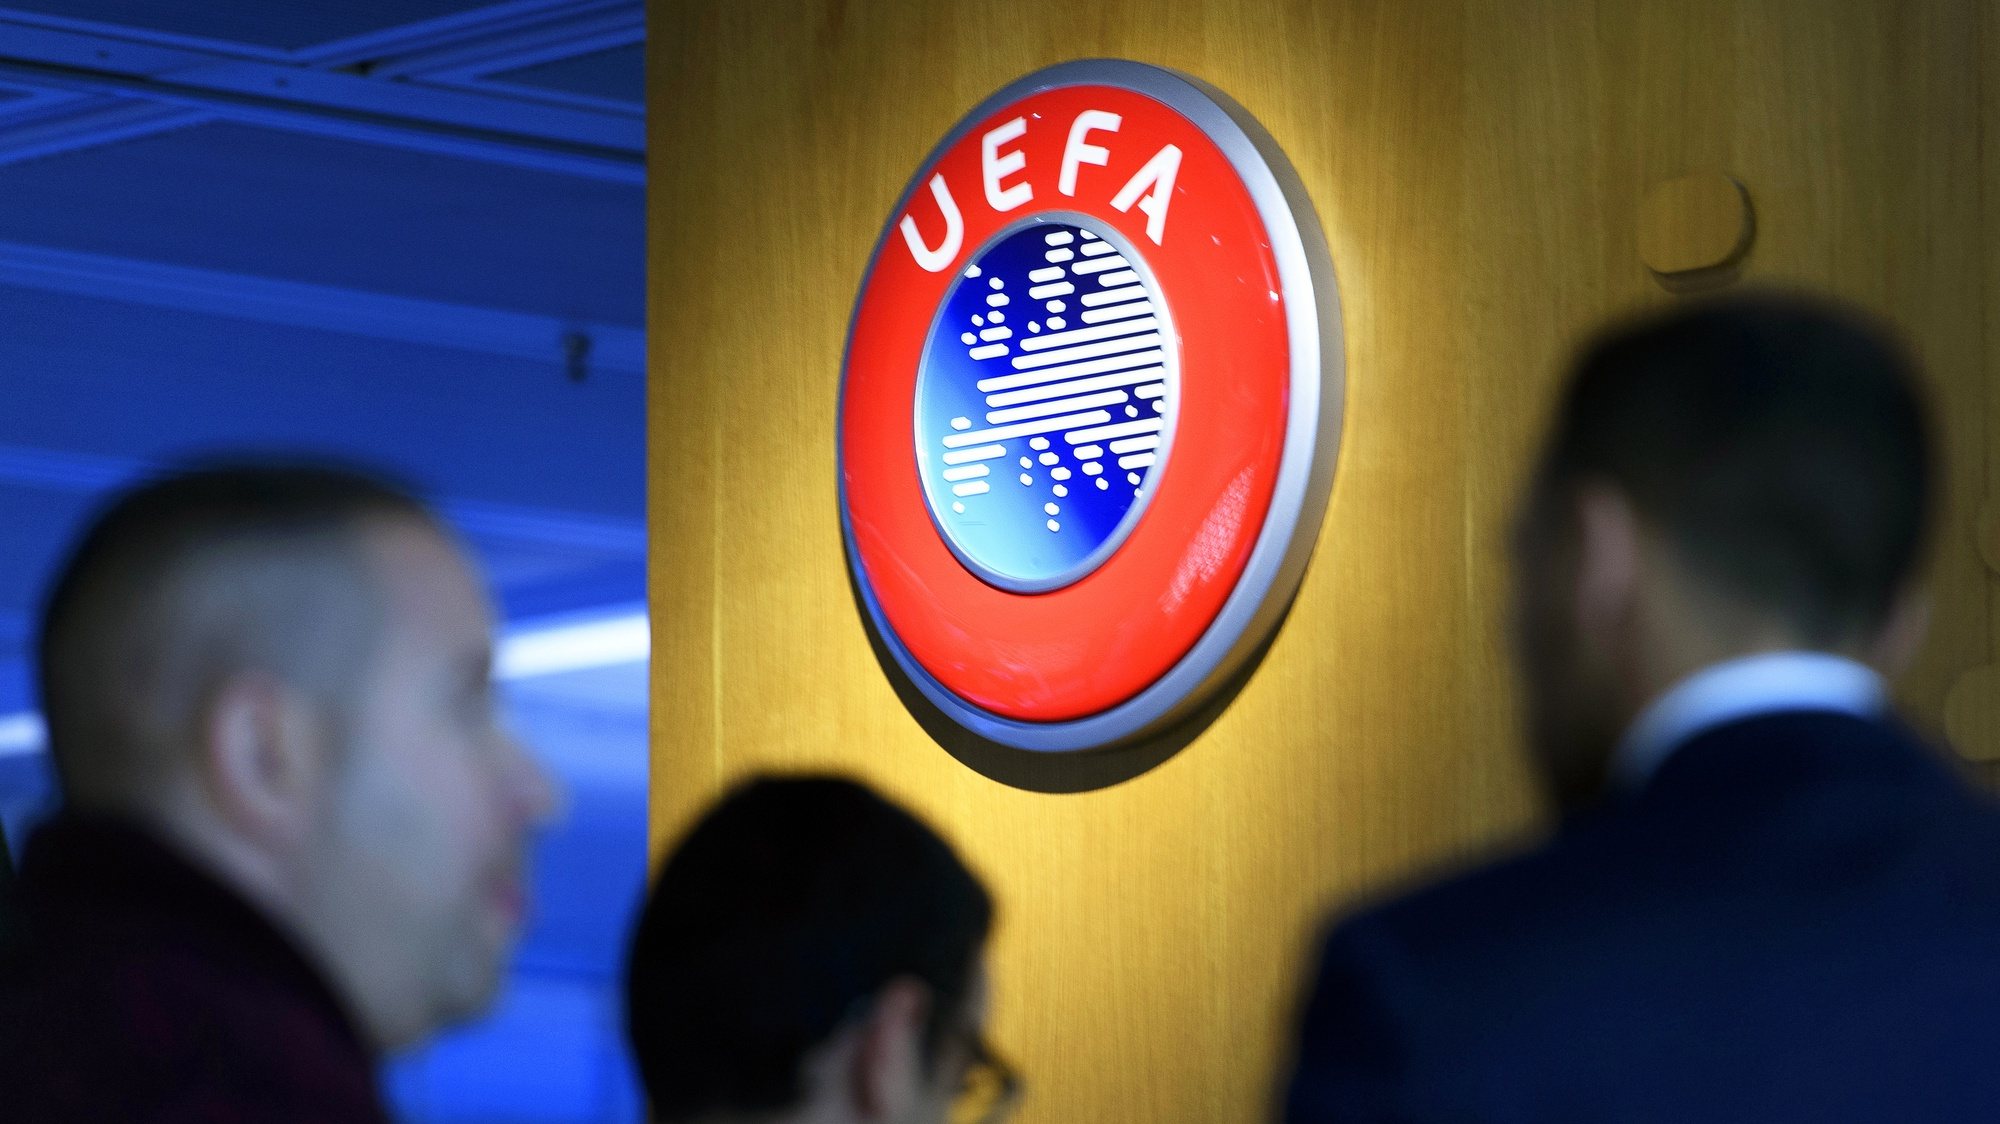 epa08487680 (FILE) - The UEFA logo on display after the meeting of the UEFA Executive Committee at the UEFA headquarters in Nyon, Switzerland, 07 December 2017 (re-issued on 16 June 2020). Lisbon&#039;s Estadio da Luz is expected to host the 2020 UEFA Champions League final in a decision by the UEFA executive committee set to be announced on 17 June 2020.  EPA/LAURENT GILLIERON *** Local Caption *** 55993944